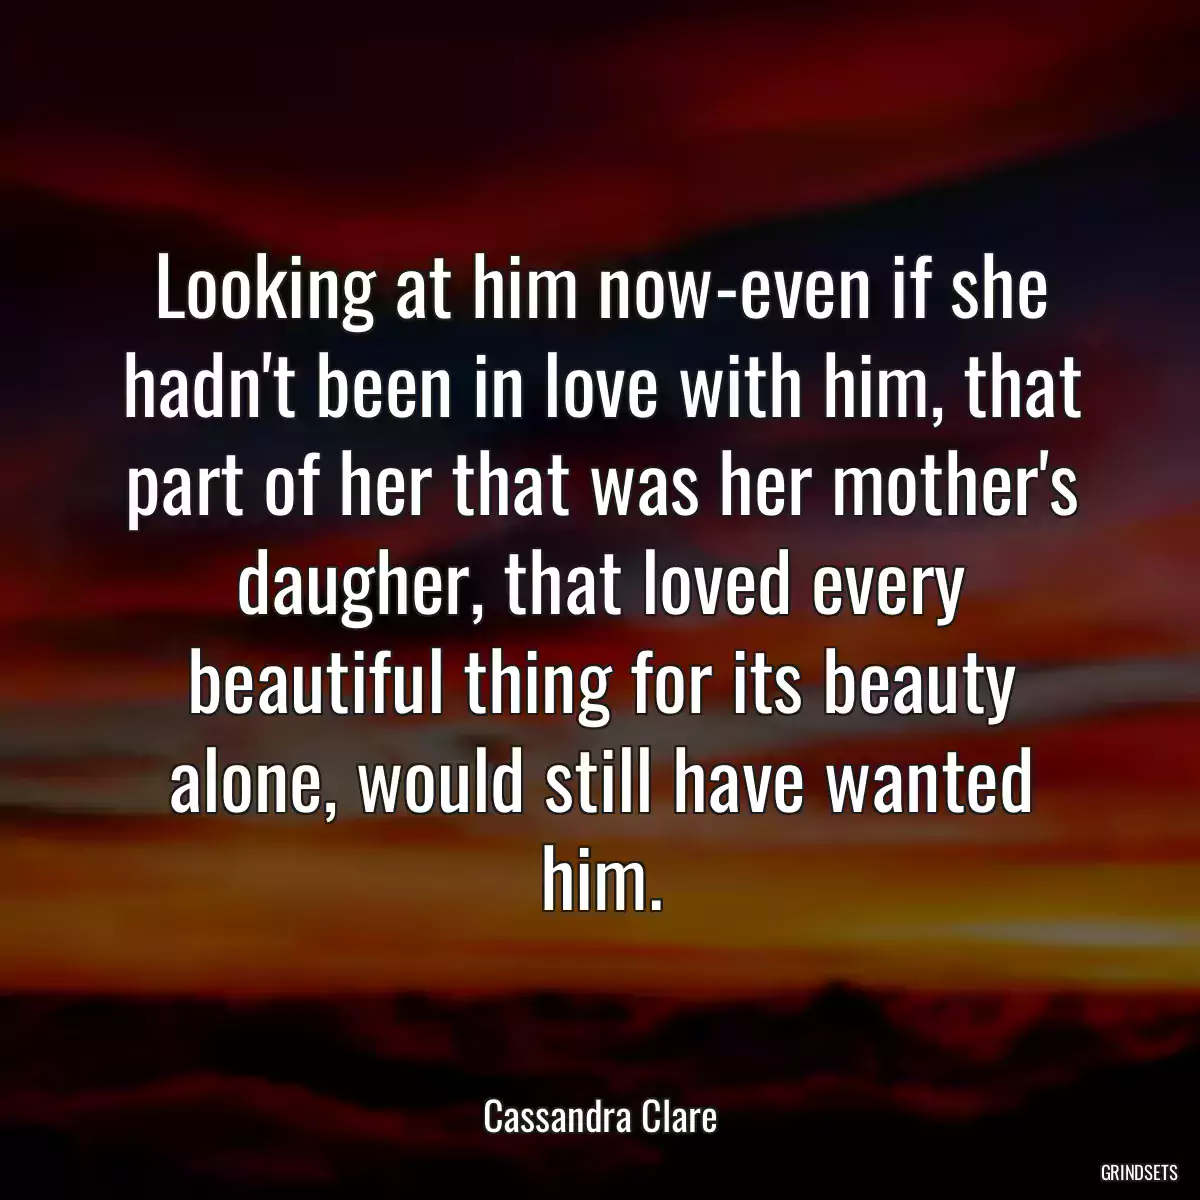 Looking at him now-even if she hadn\'t been in love with him, that part of her that was her mother\'s daugher, that loved every beautiful thing for its beauty alone, would still have wanted him.